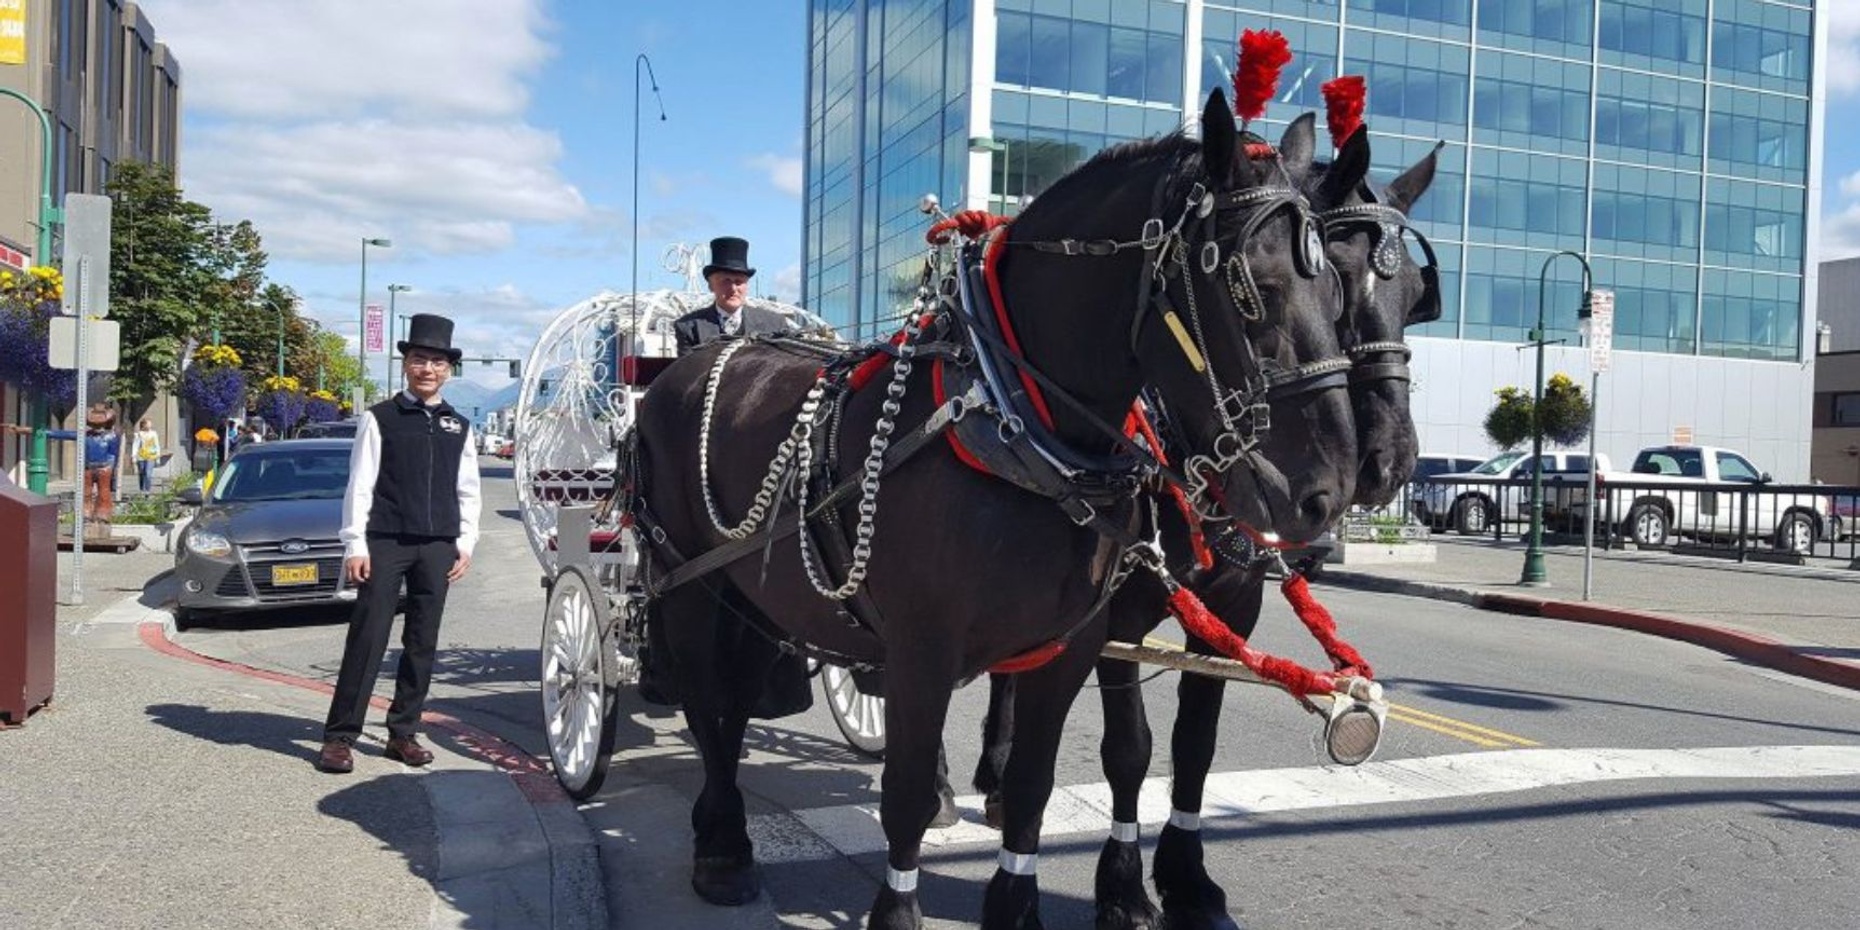 30-Minute Horse Drawn Carriage Ride of Downtown Anchorage